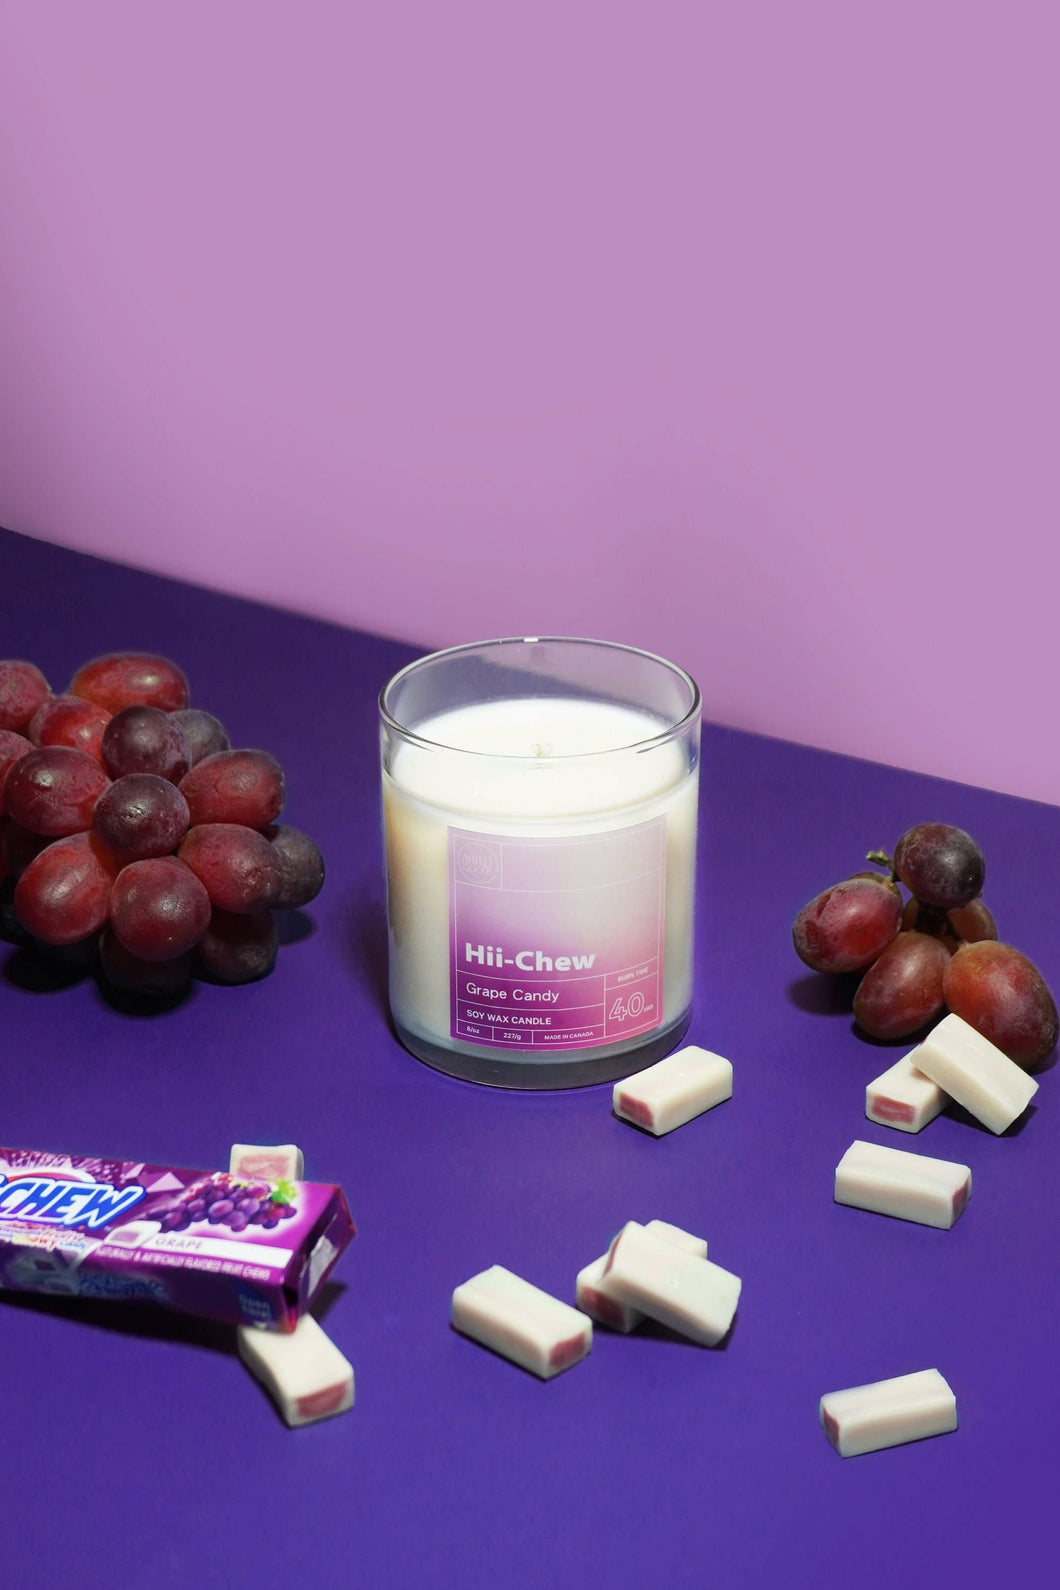 Hii-Chew Grape Candy Soy Wax Candle